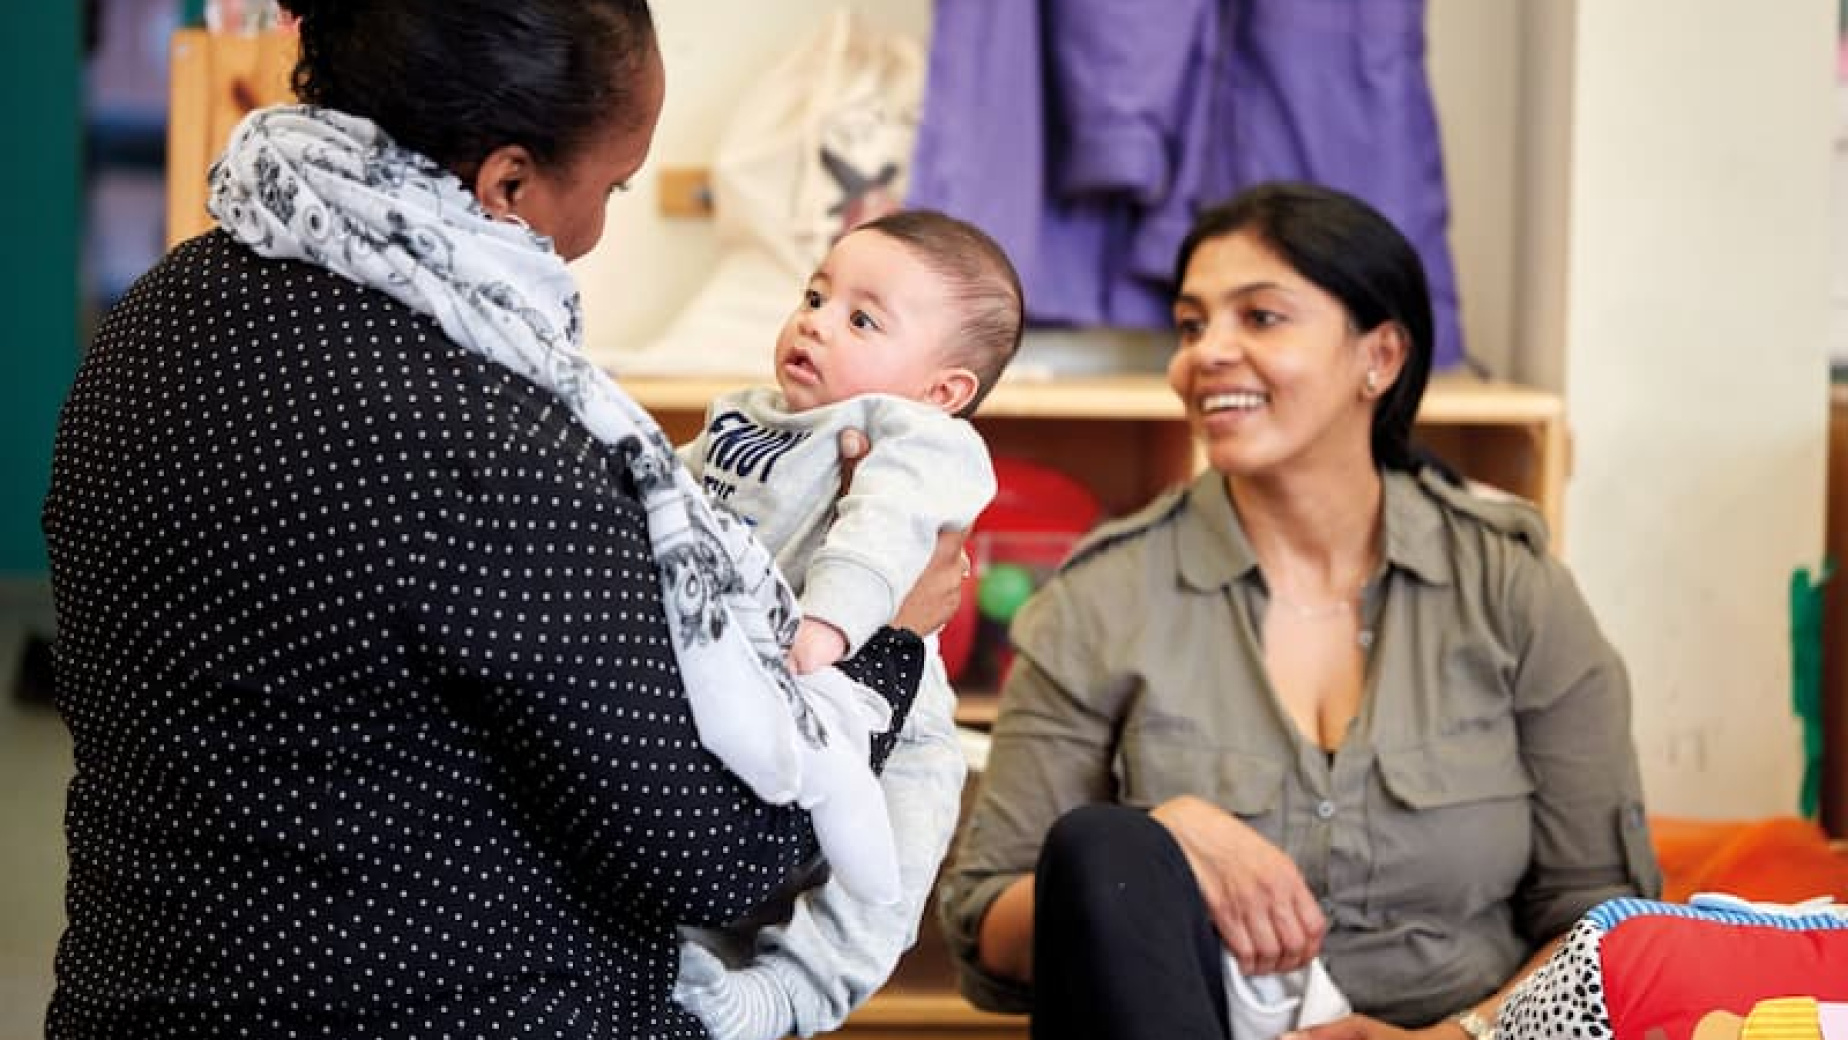 Two women and a baby at a support group